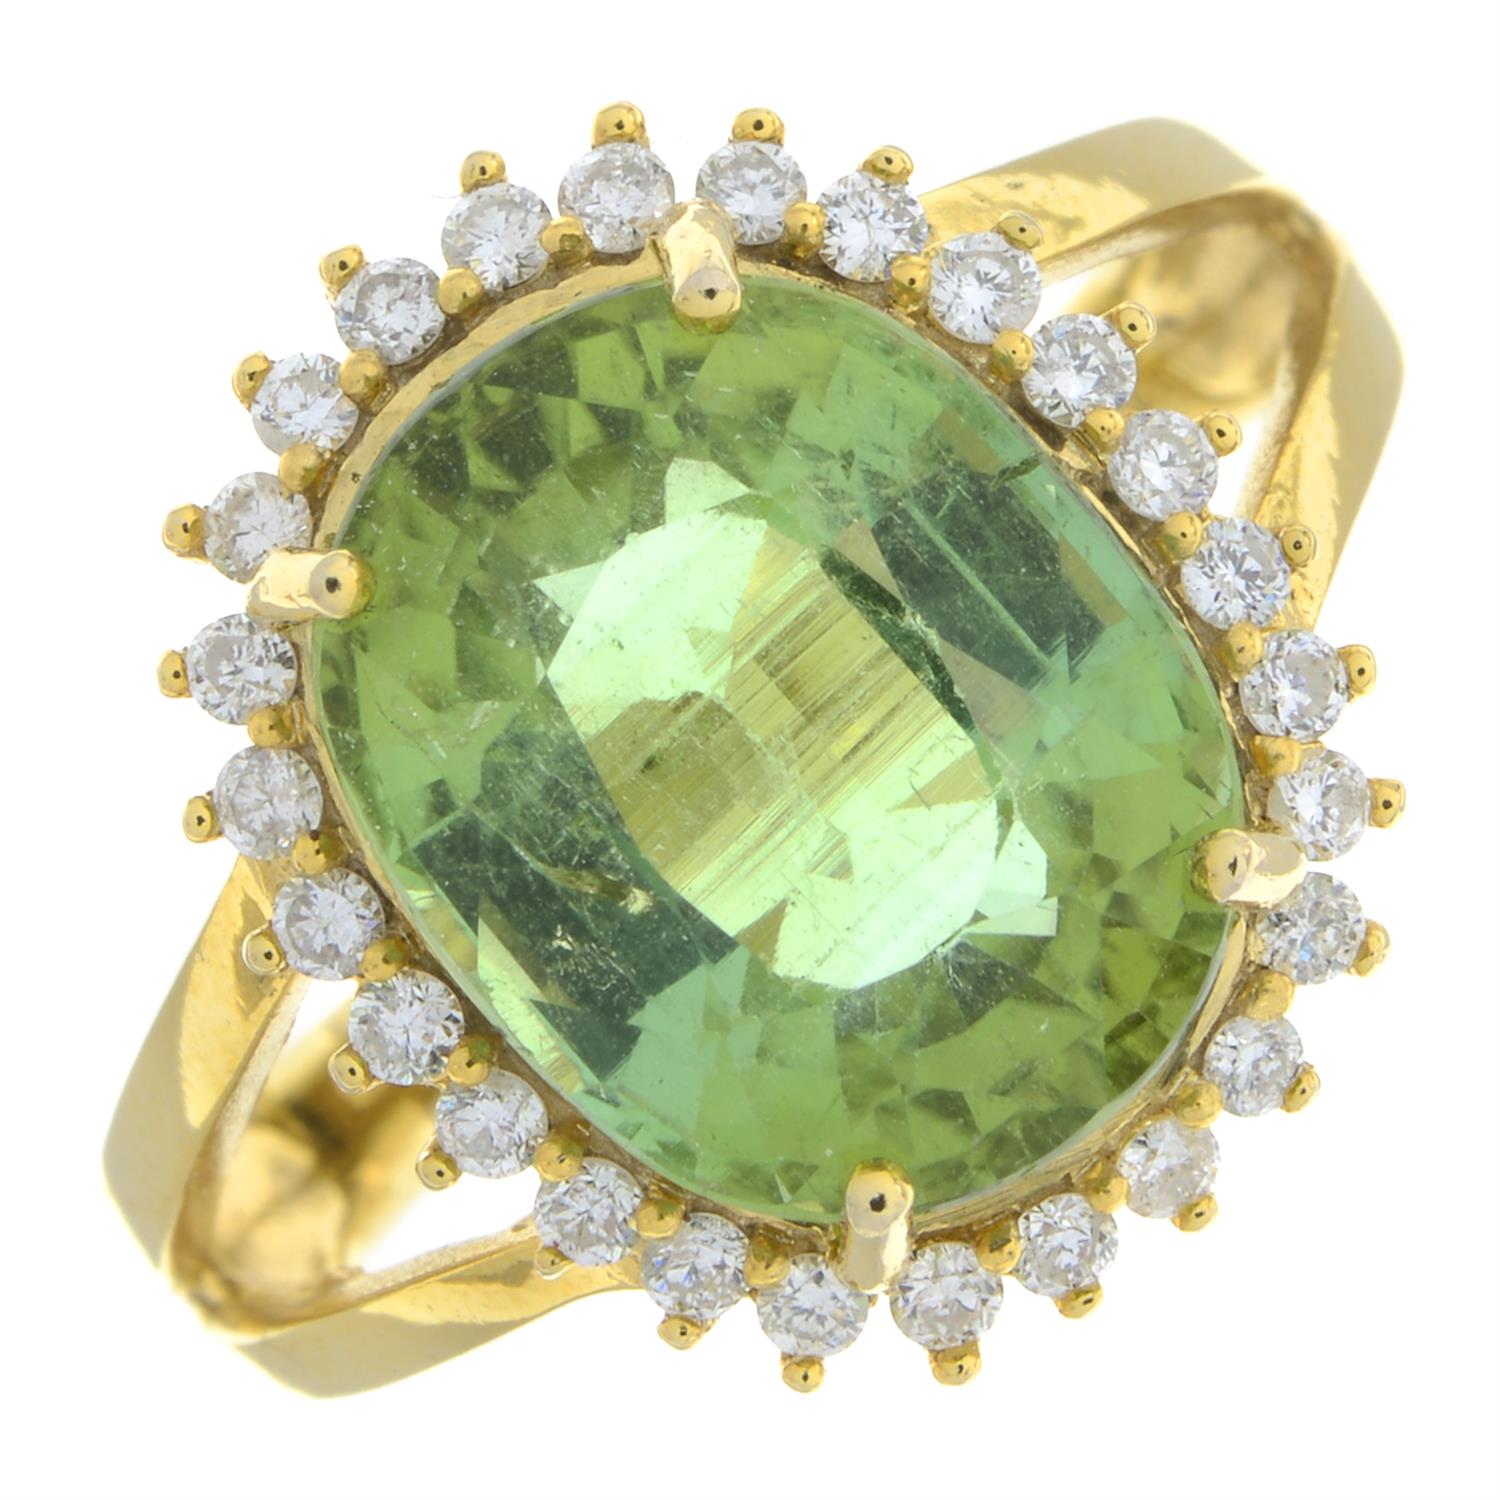 Green tourmaline and diamond cluster ring - Image 2 of 5